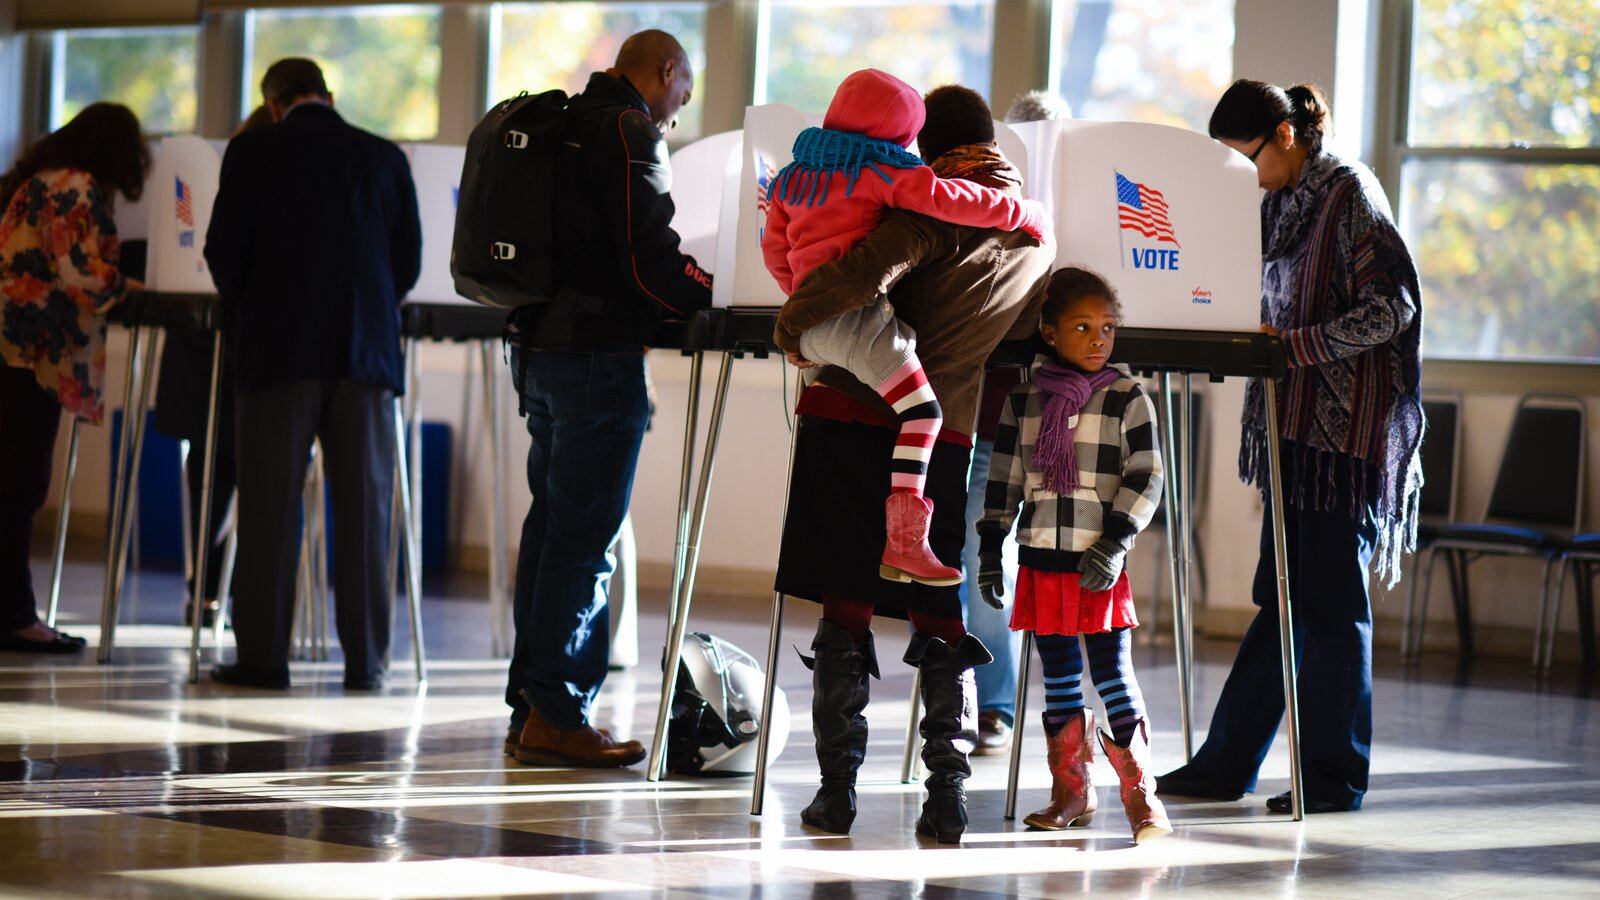 A woman holding a small child stands at a row of polling place booths, along with other voters, as a girl looks on.